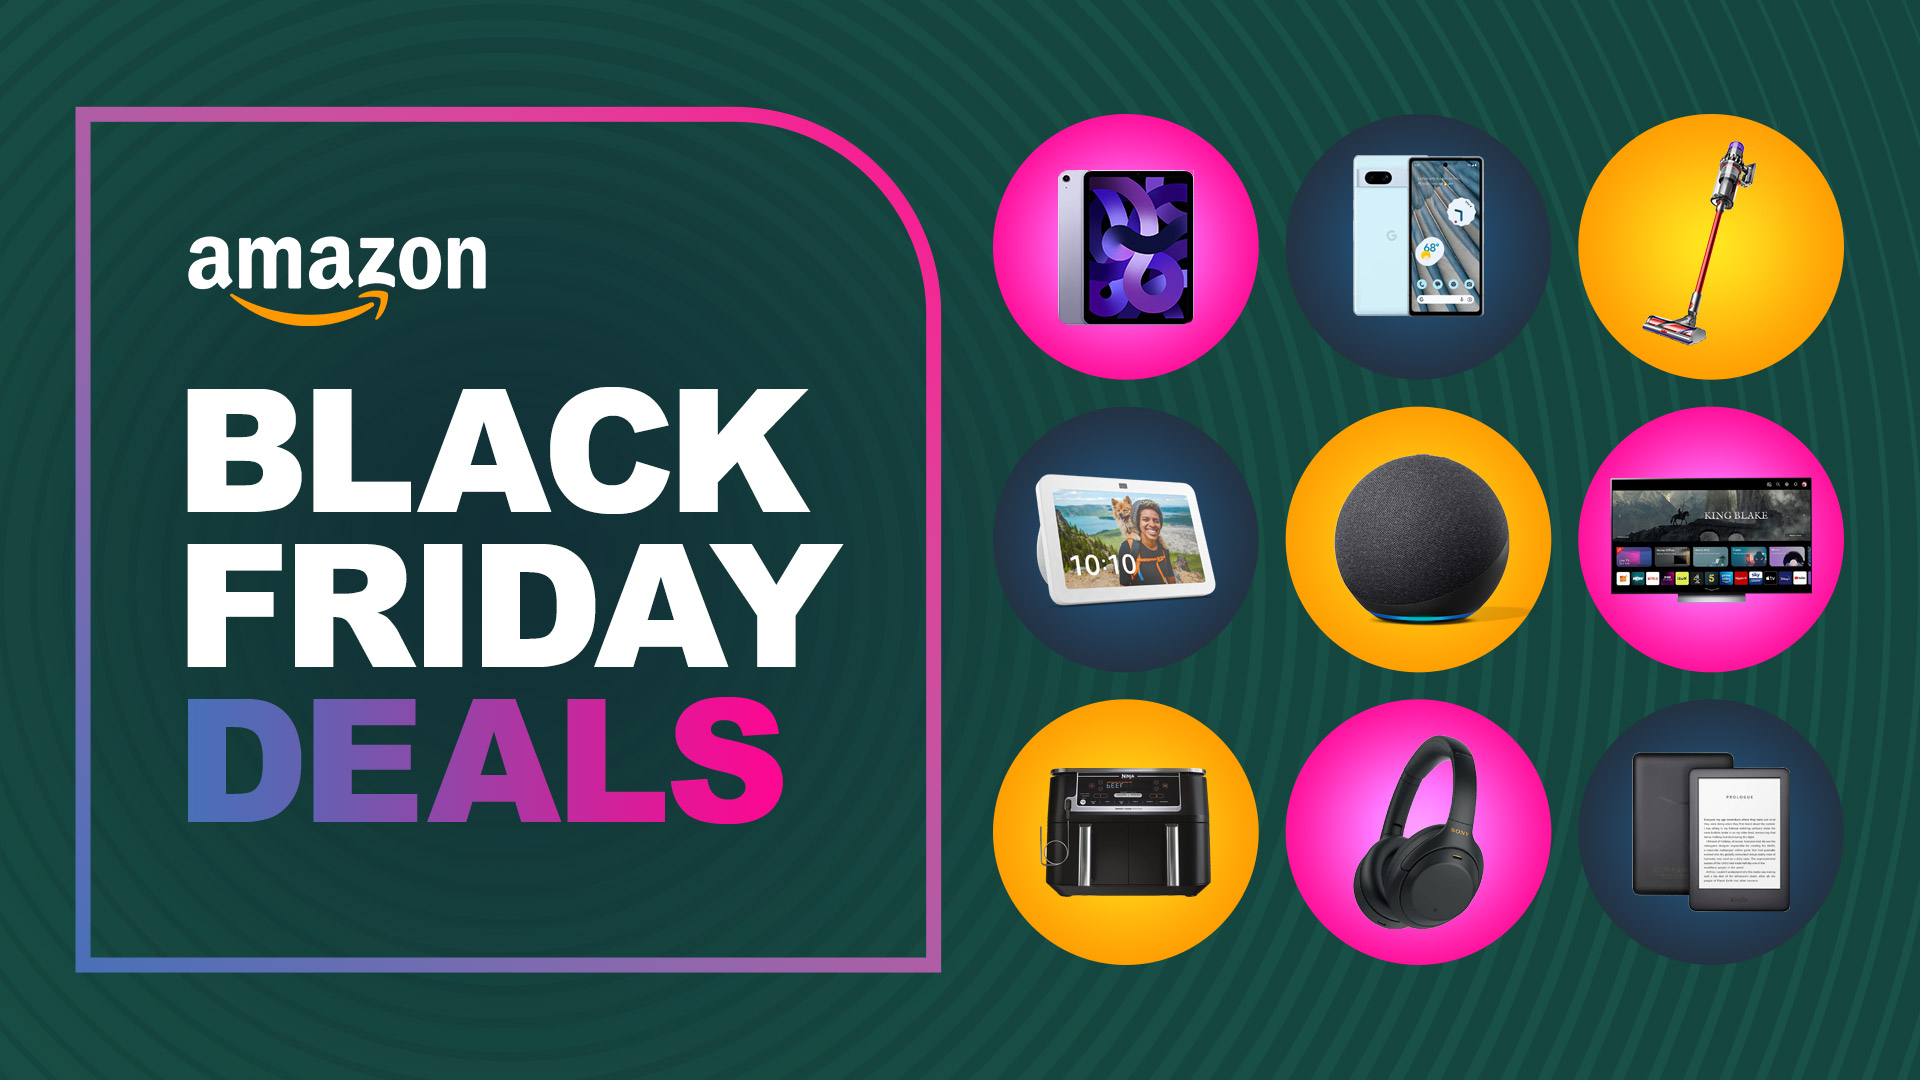 Amazon Black Friday deals are live in the UK – shop today's 31 best deals starting from £17.99